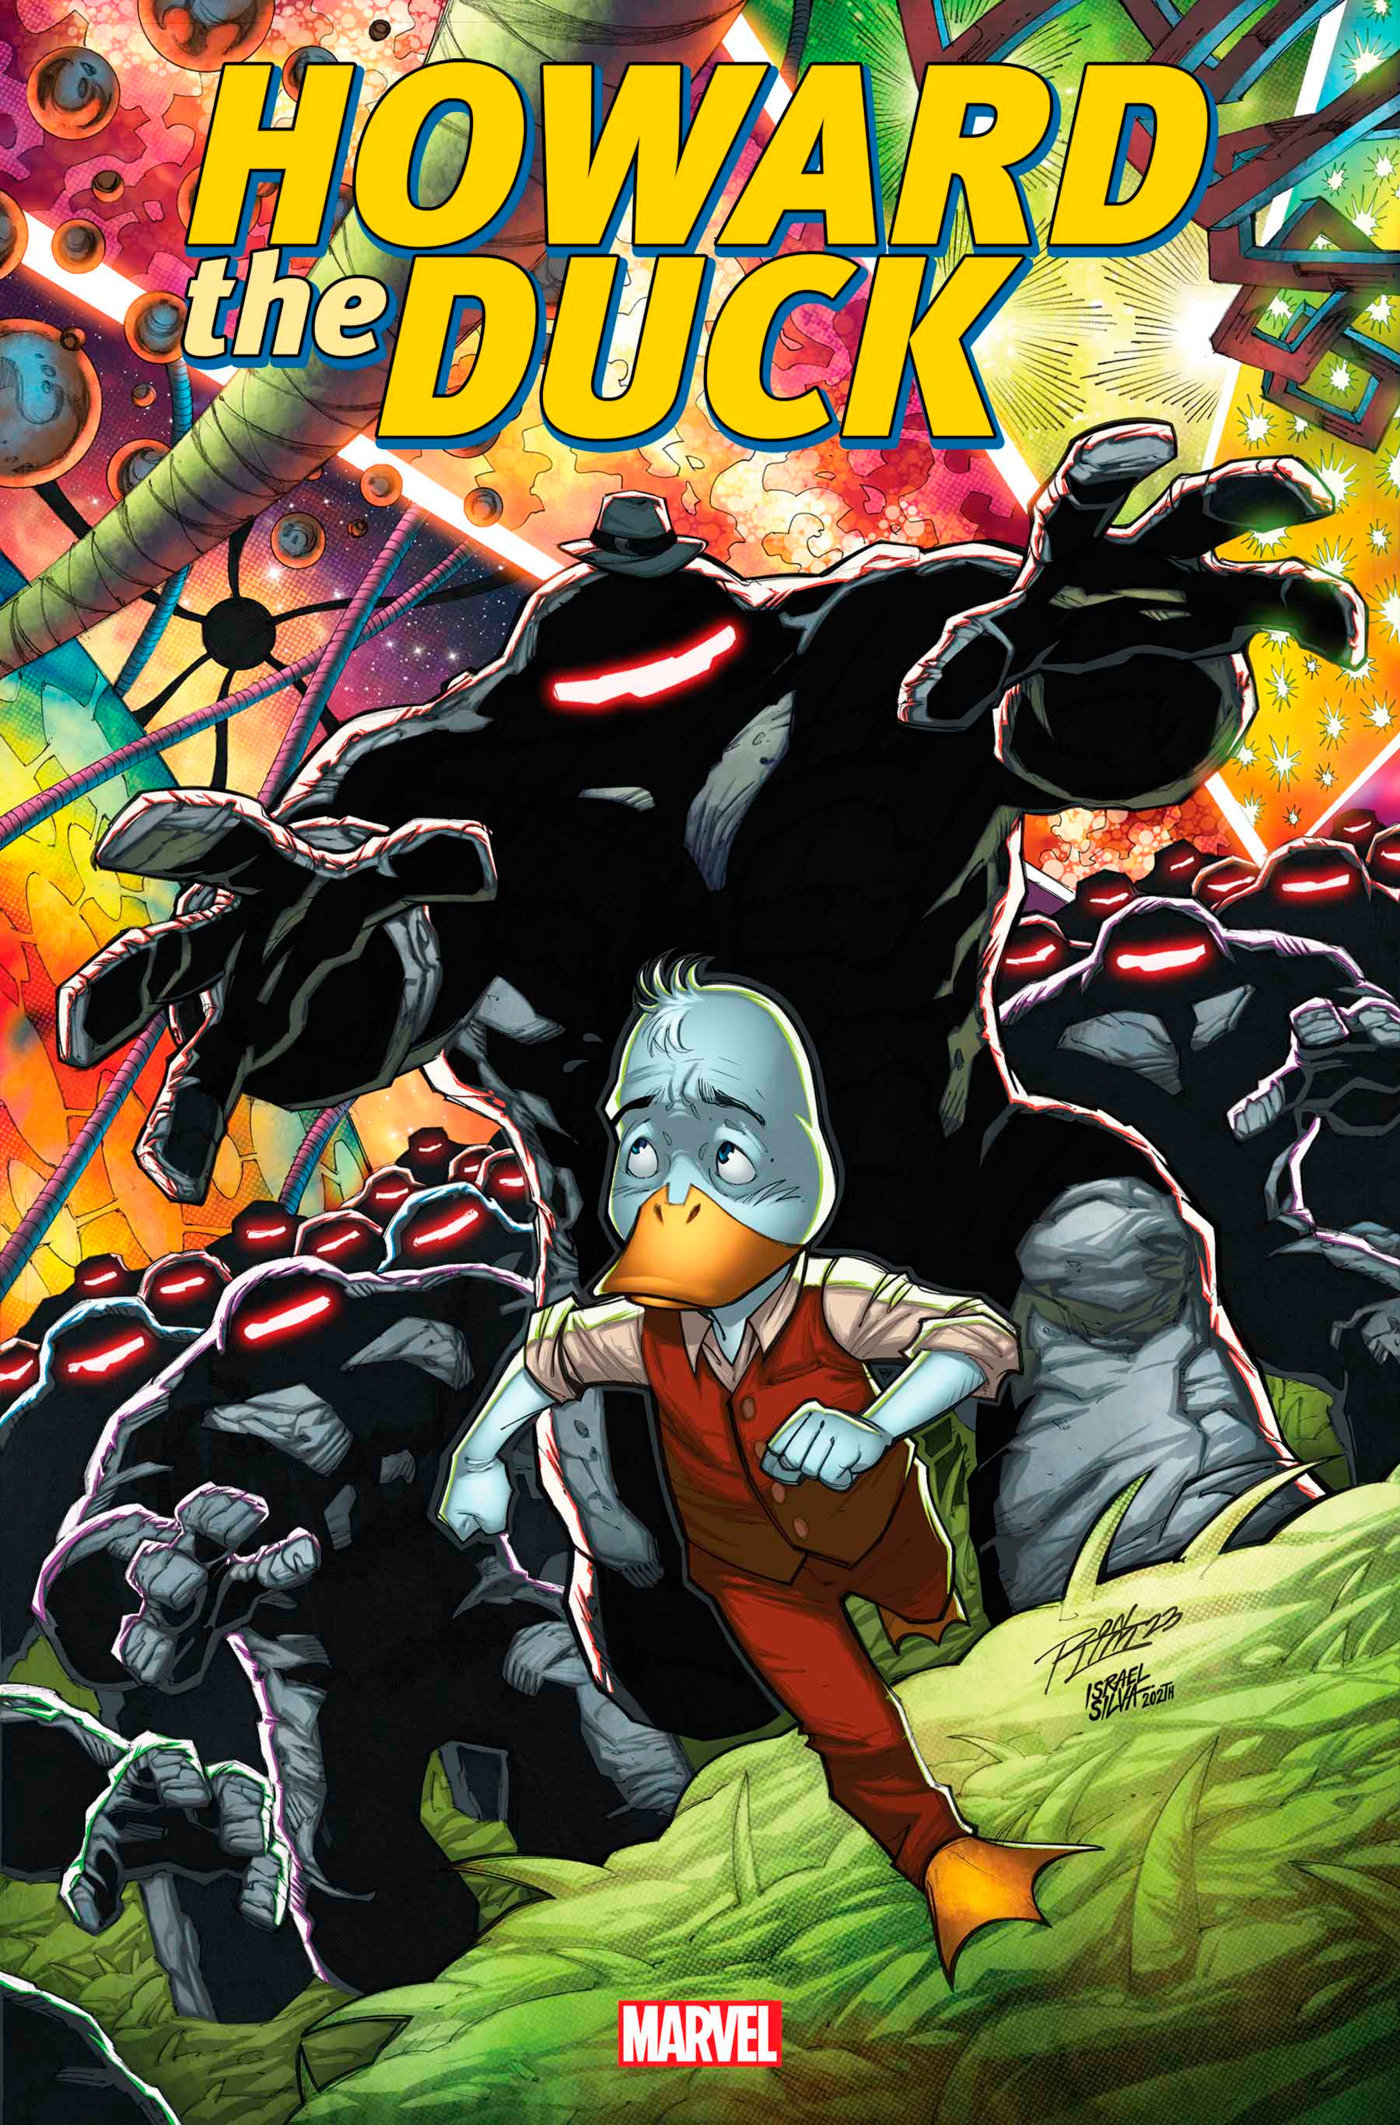 Howard The Duck #1 Ron Lim Variant